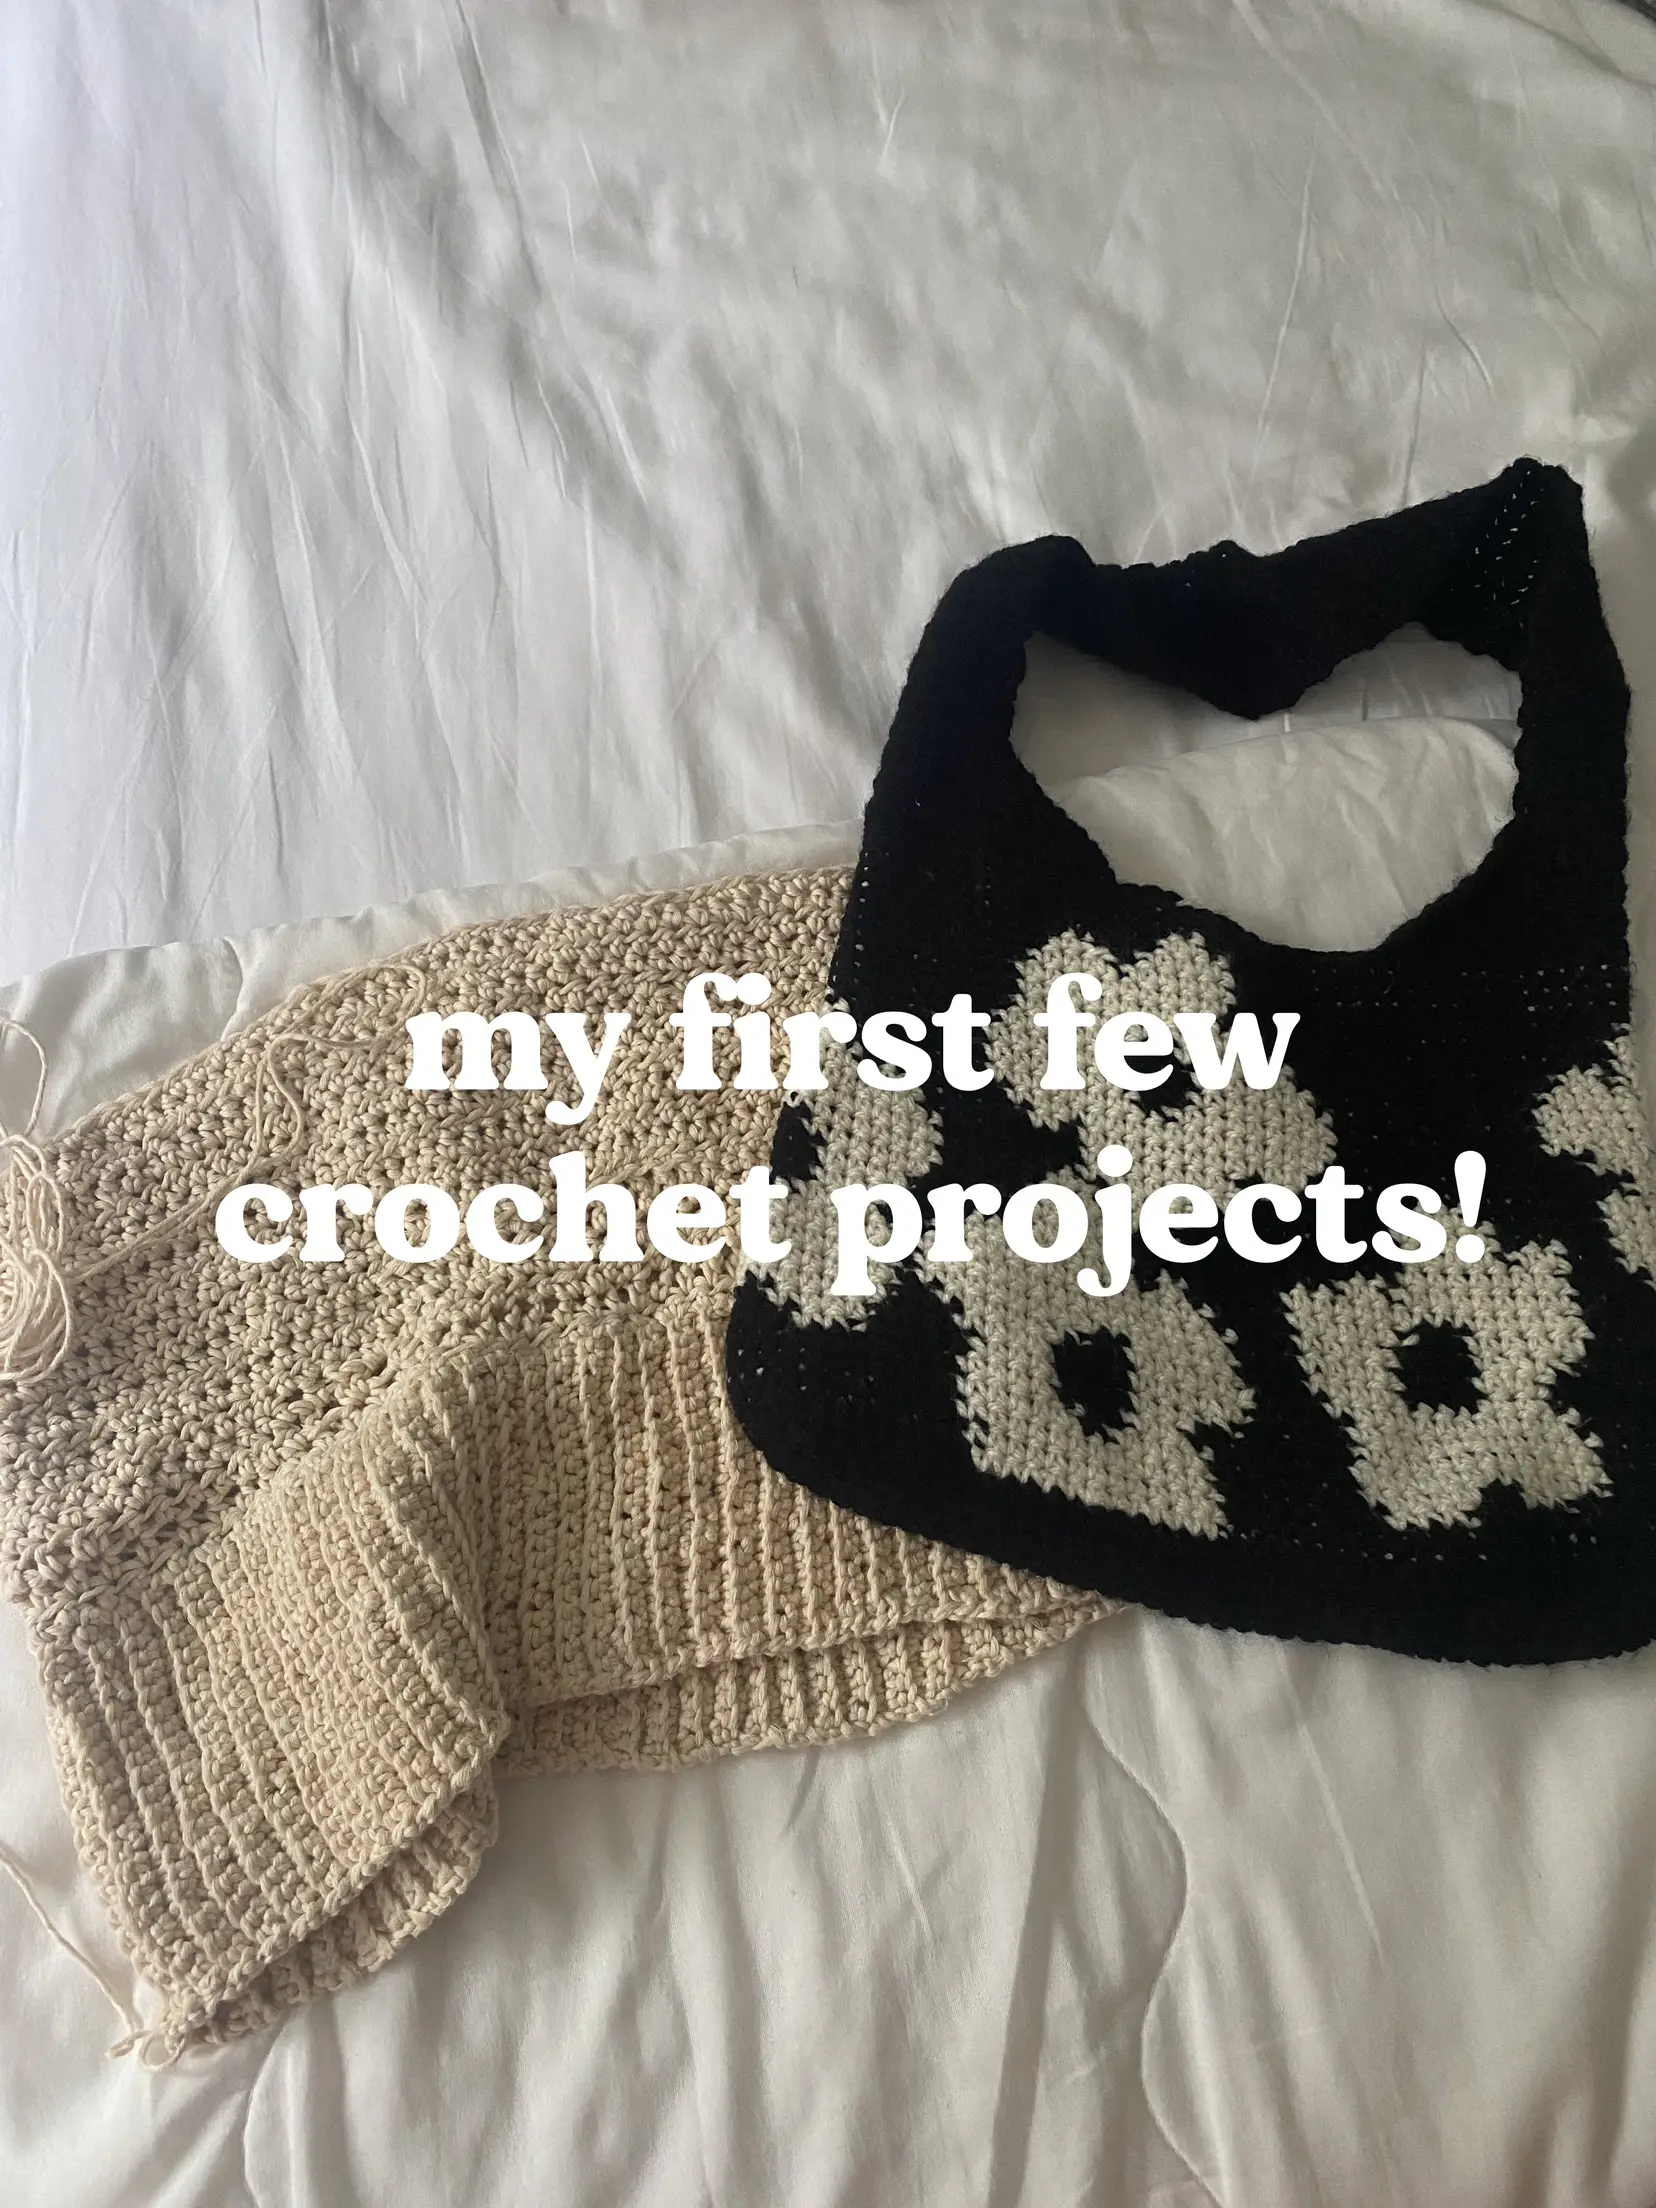 making a top without knowing how to crochet⁉️ 's images(0)